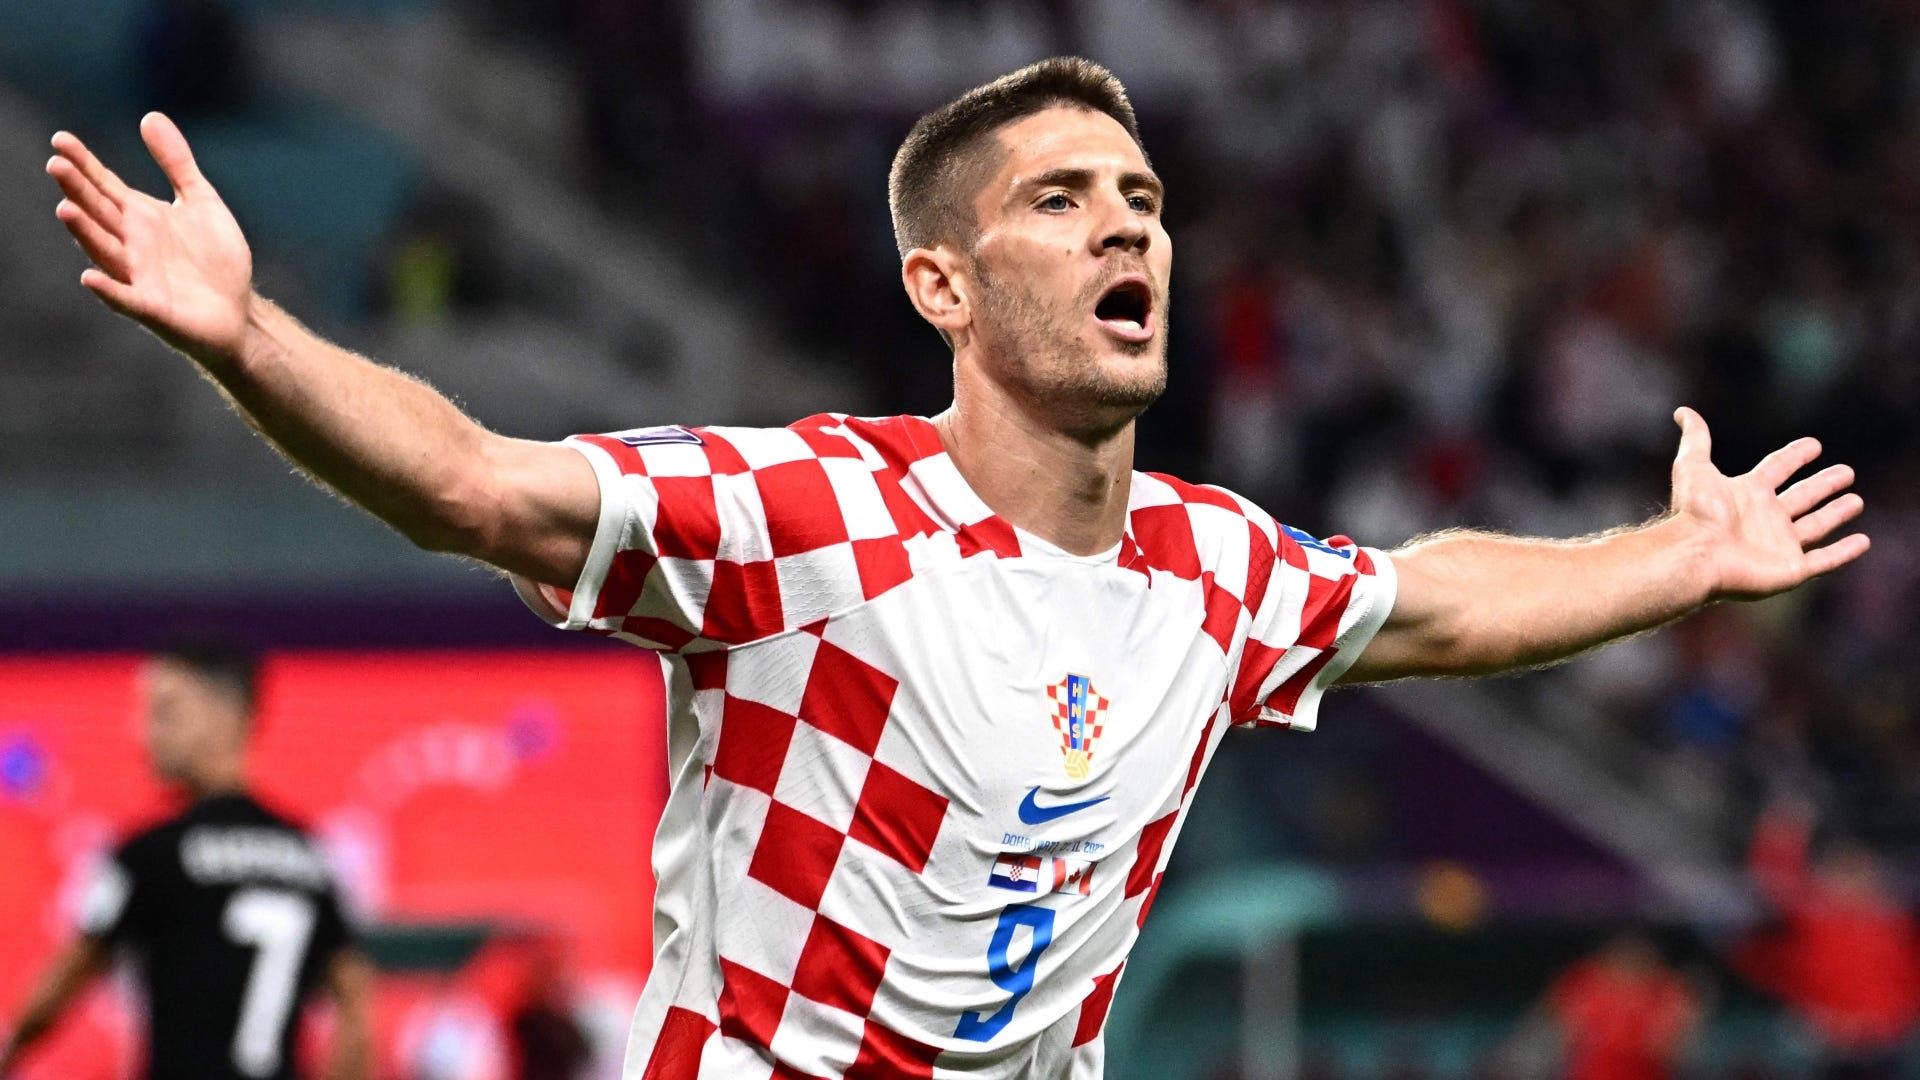 'Croatia demonstrated who f*cked whom' - Kramaric hits back at Herdman after dumping Canada out of World Cup | Goal.com US